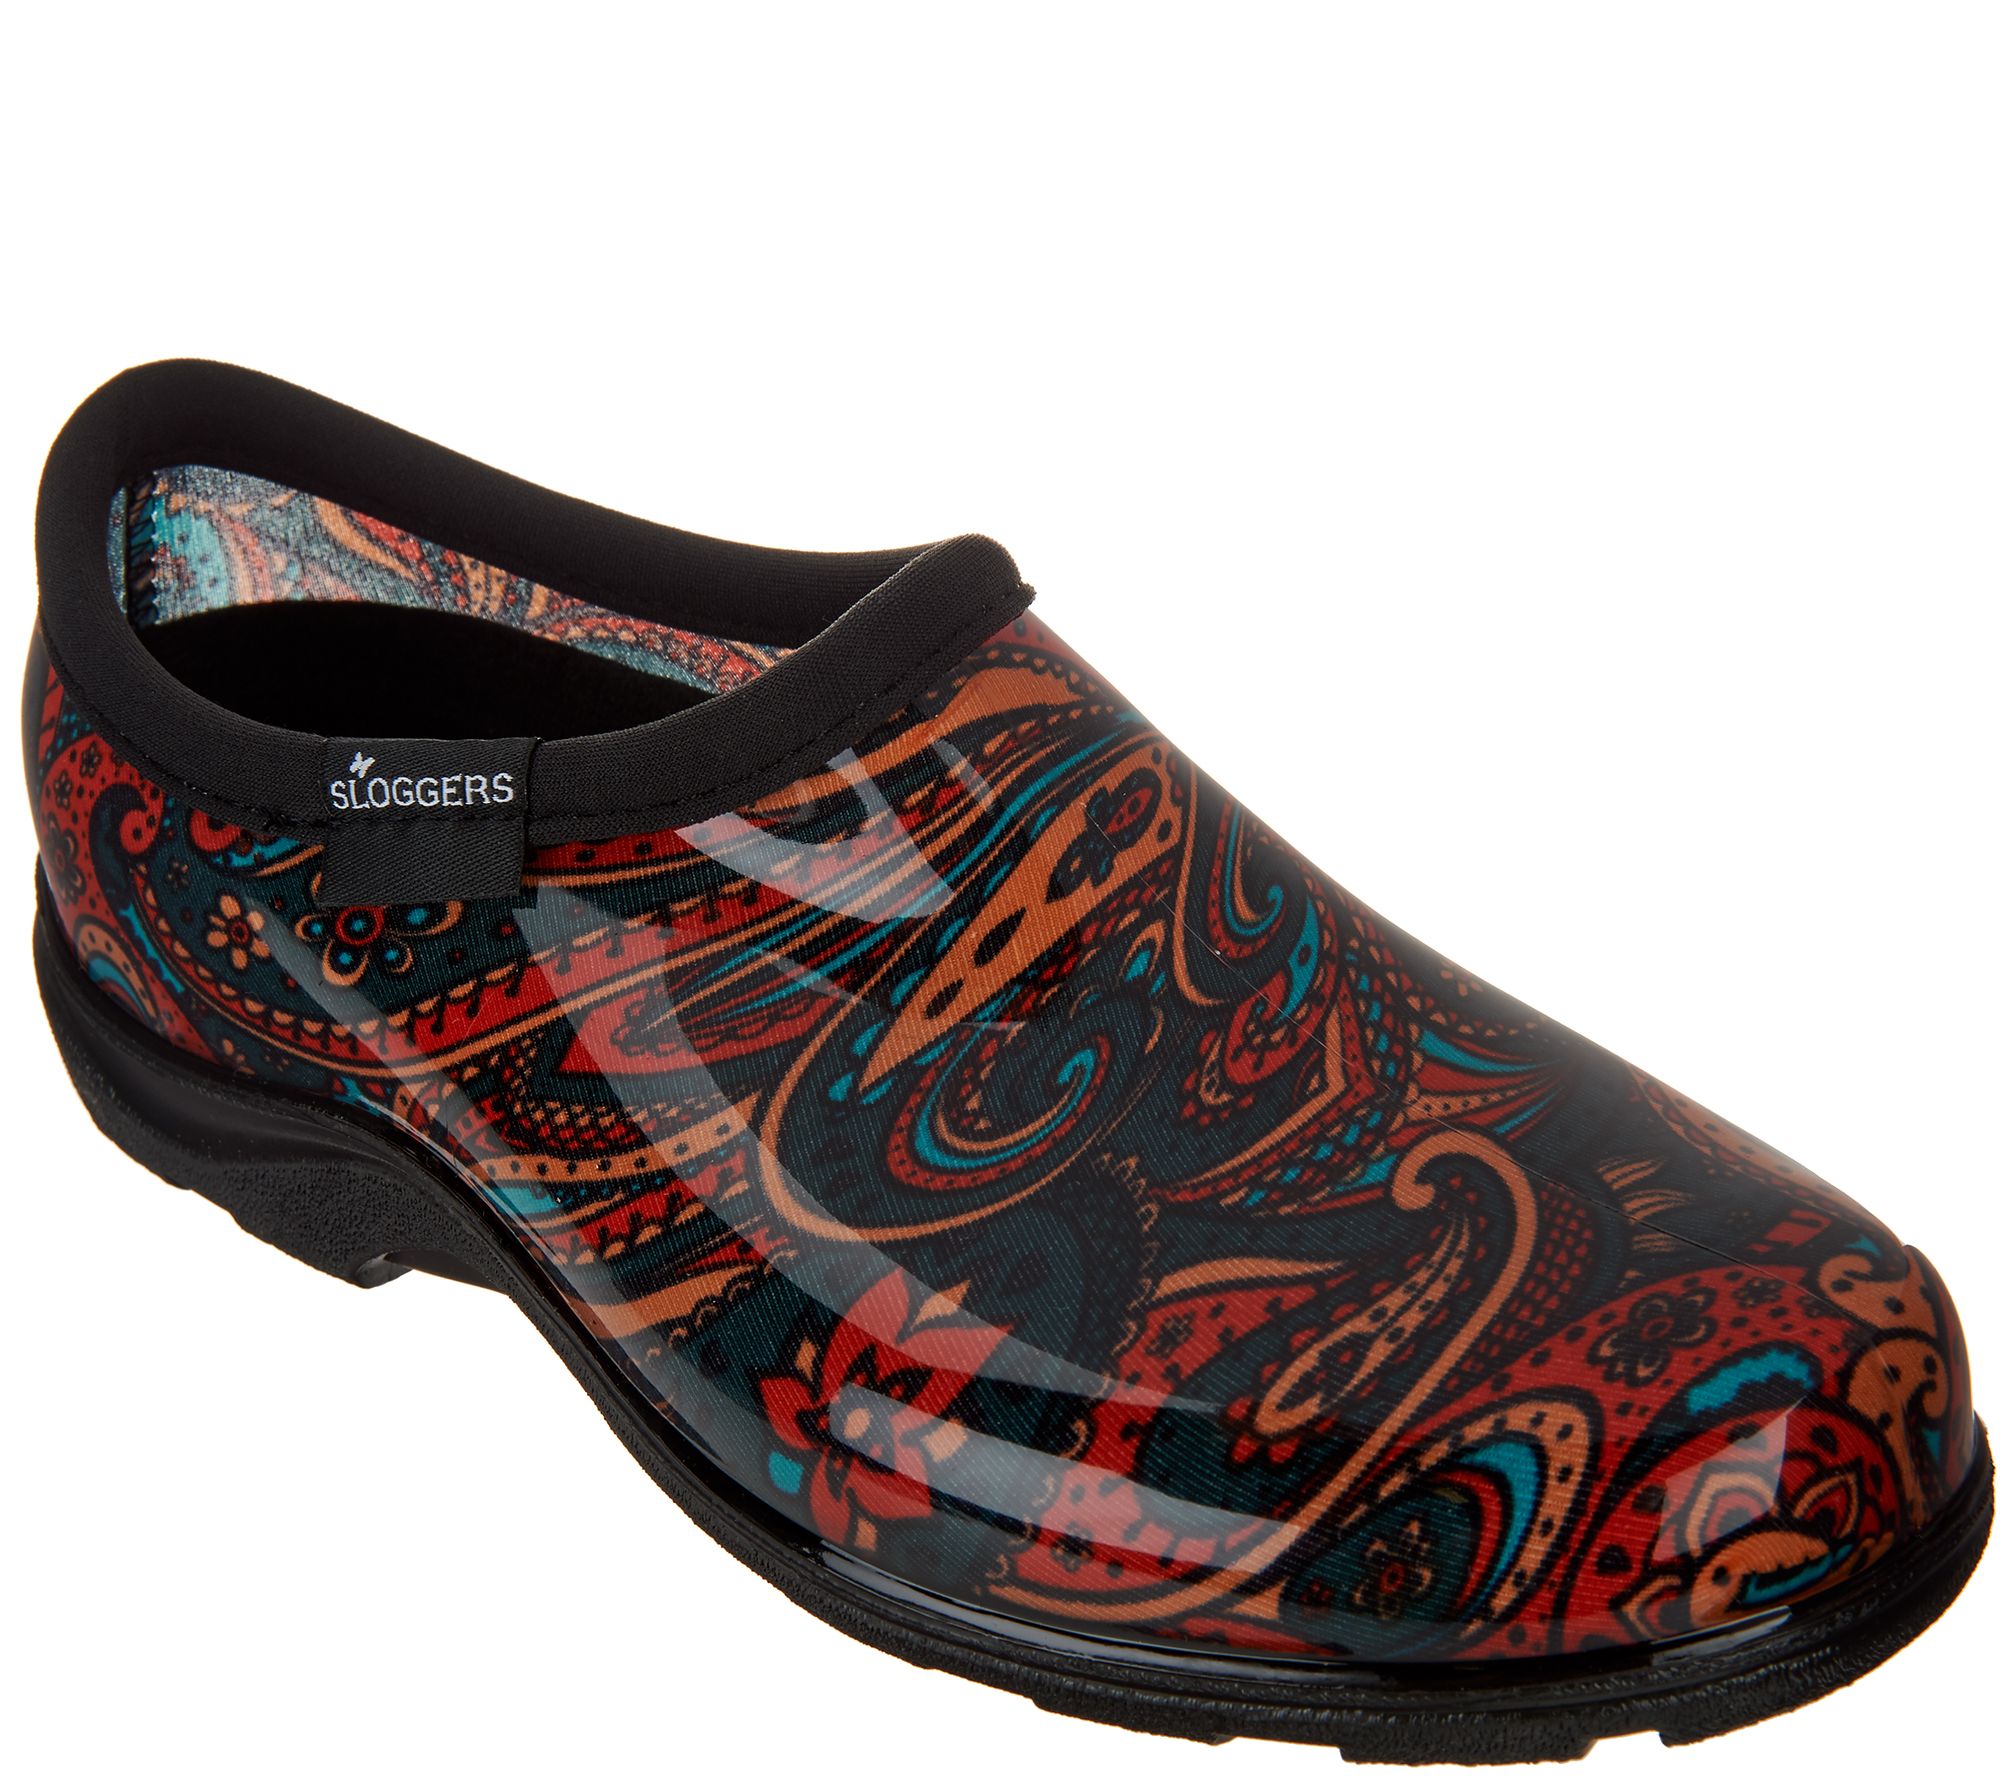 Sloggers Waterproof Paisley Garden Shoes with Comfort Insoles - Page 1 ...